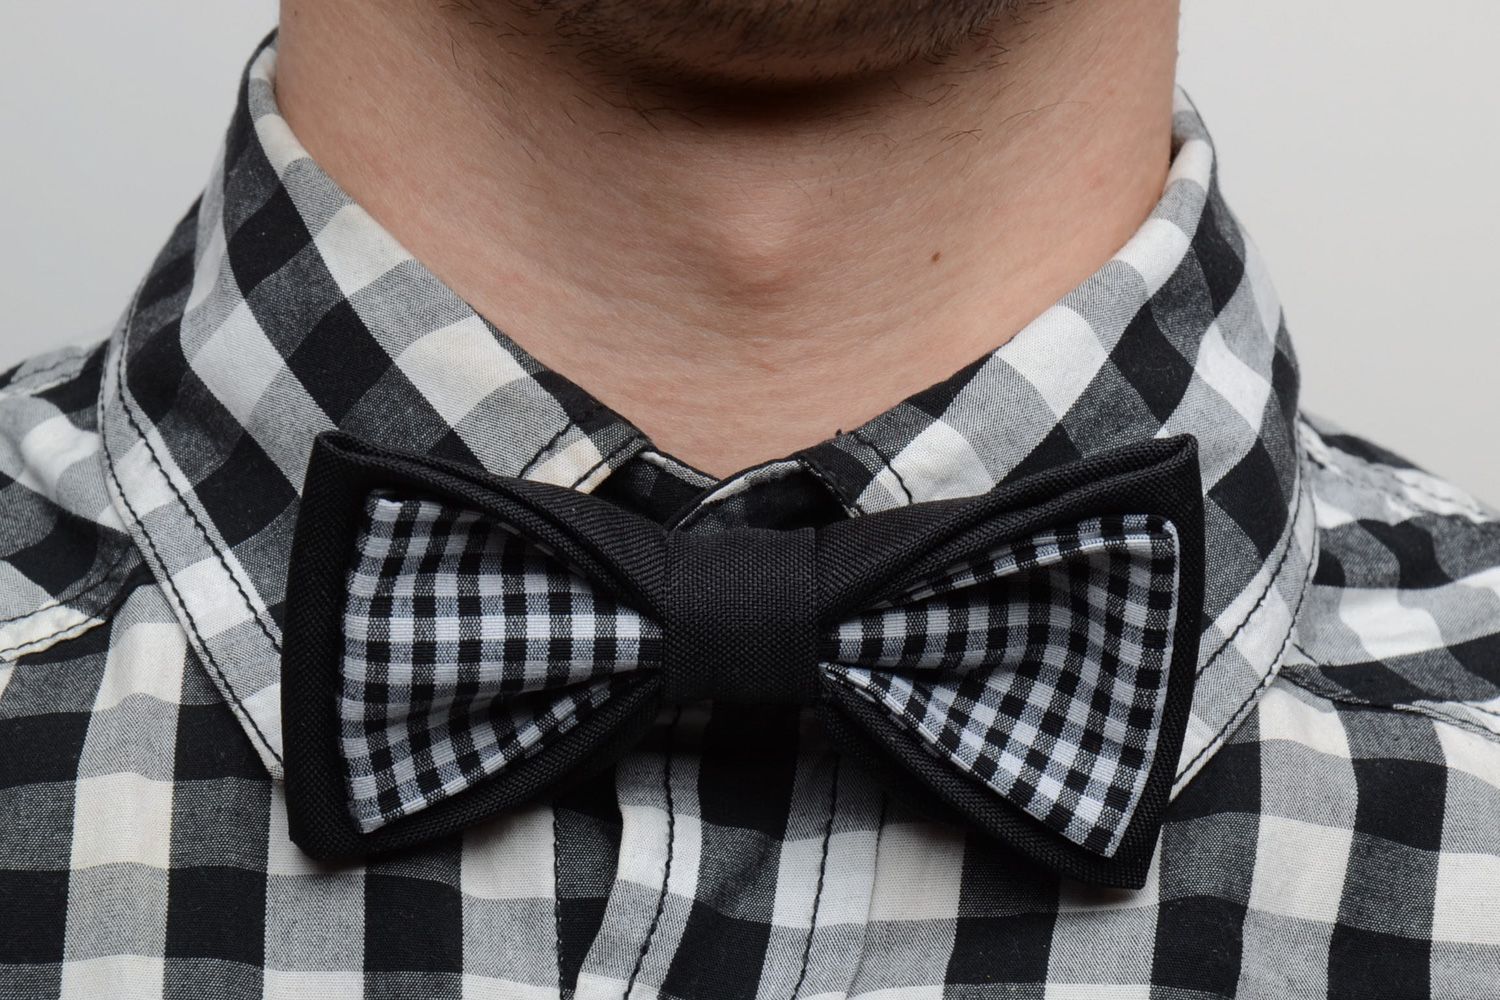 Handmade bow tie sewn of black and checkered costume fabric for men photo 1